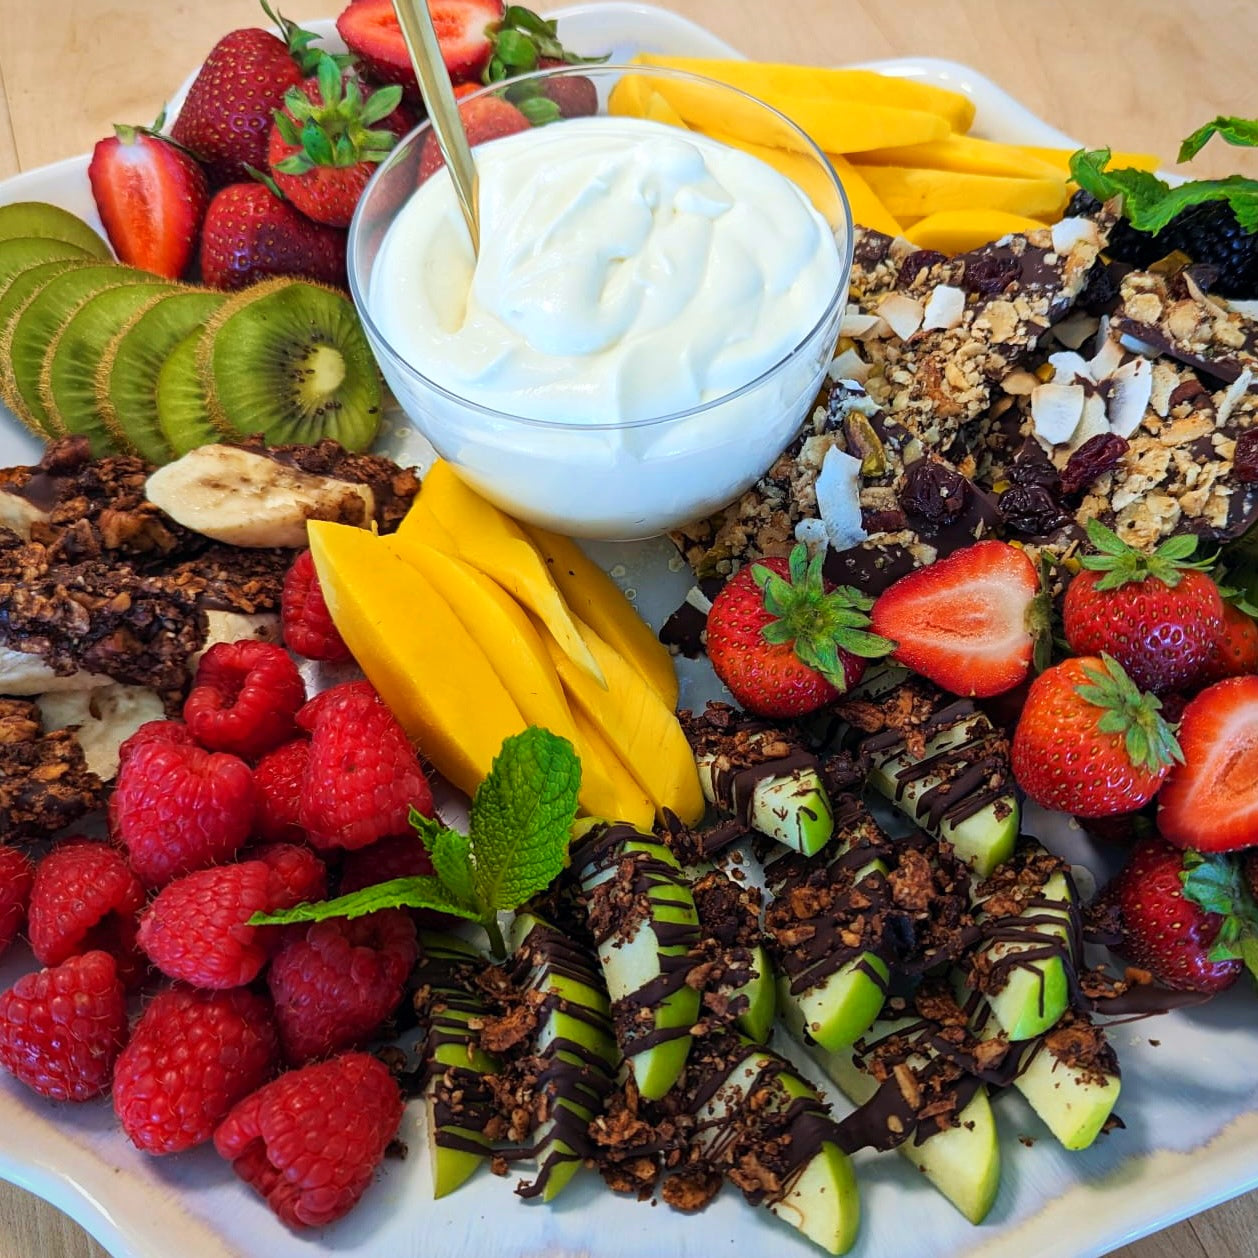 Fresh fruit platter with a bowl of yogurt for dipping and topped with Struesli granola